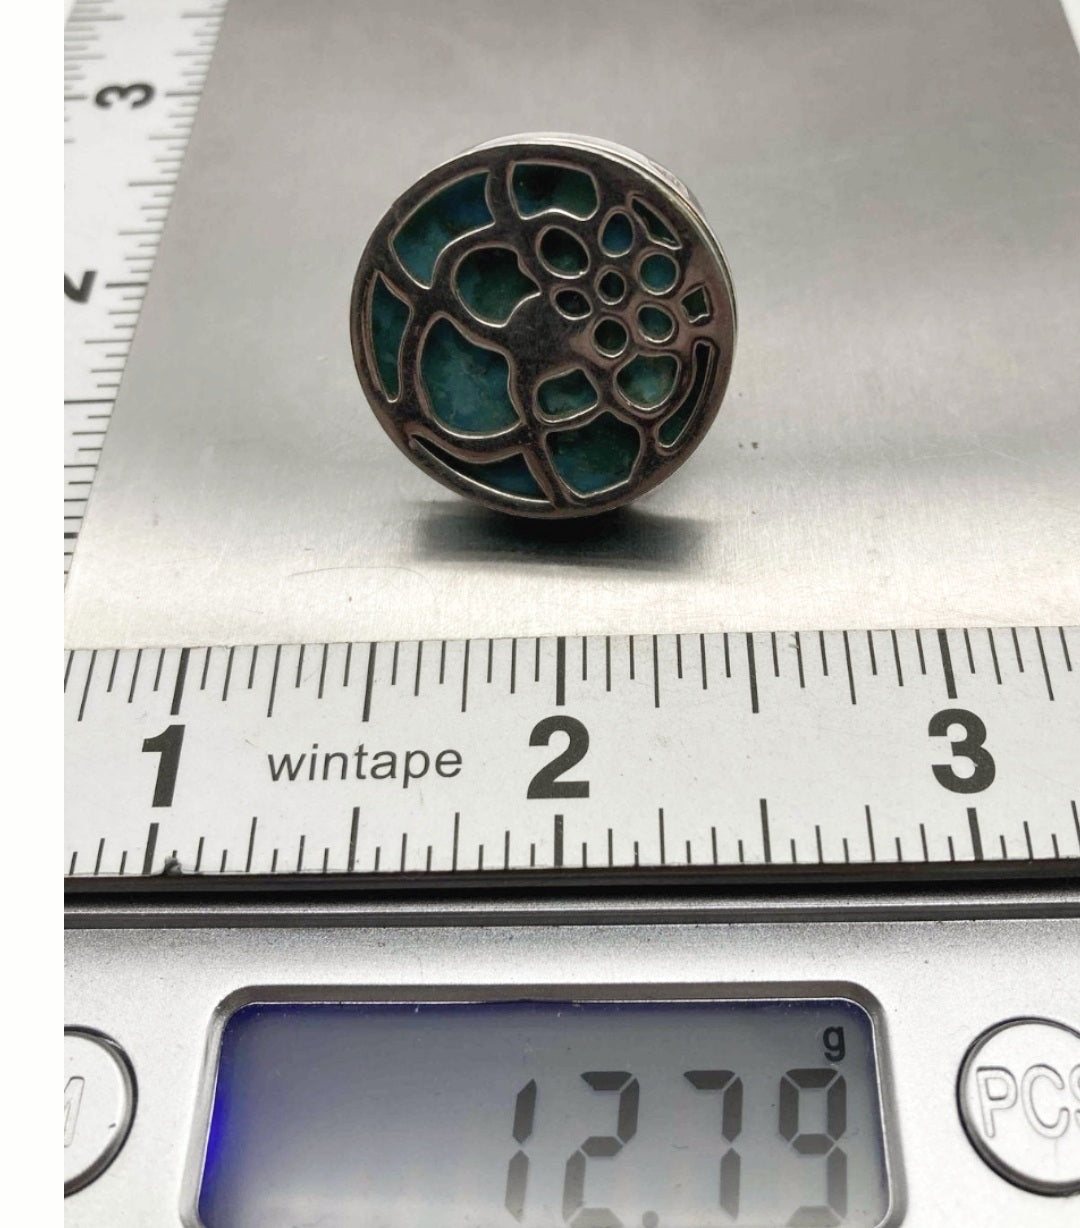 Unique Round Stering Silver & Turquoise Ring (Size 6)